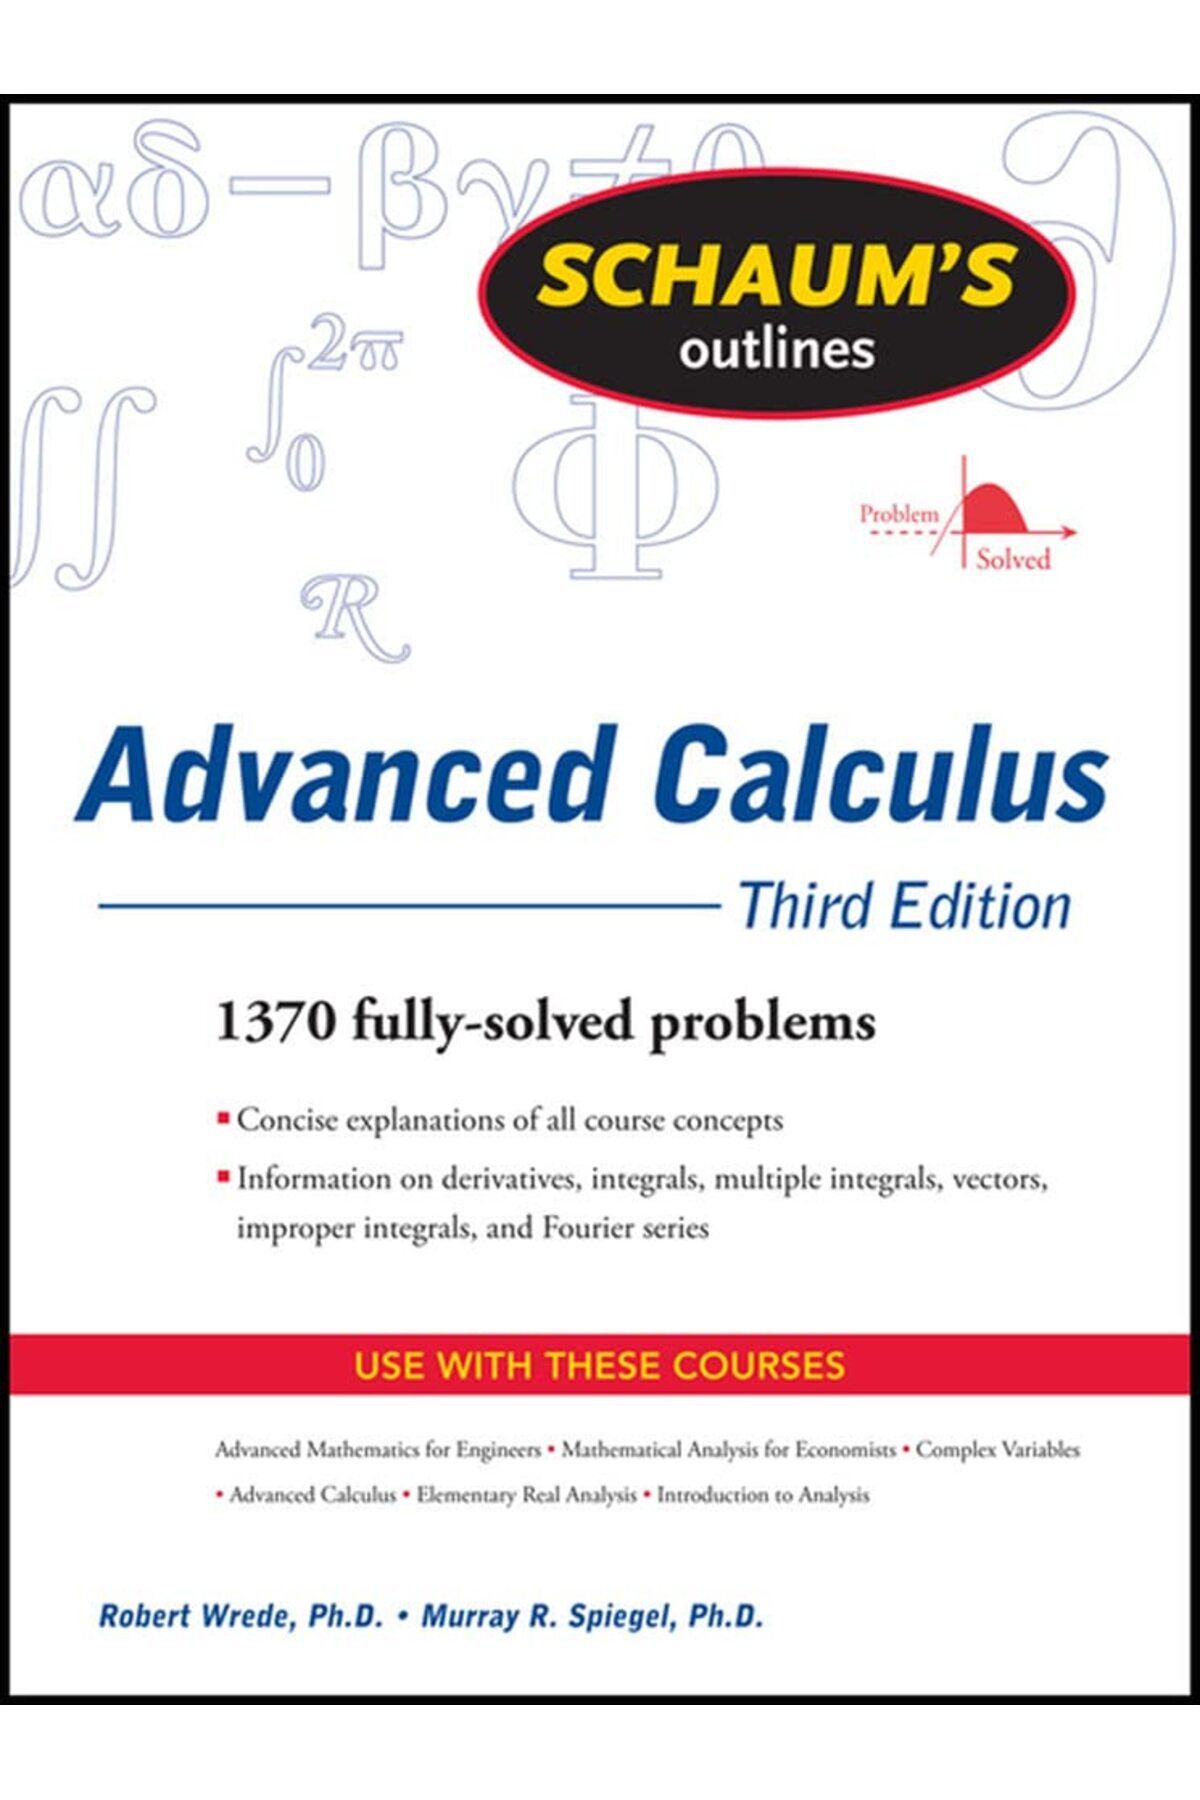 McGraw Hill Education Schaum's Outline of Advanced Calculus, Third Edition